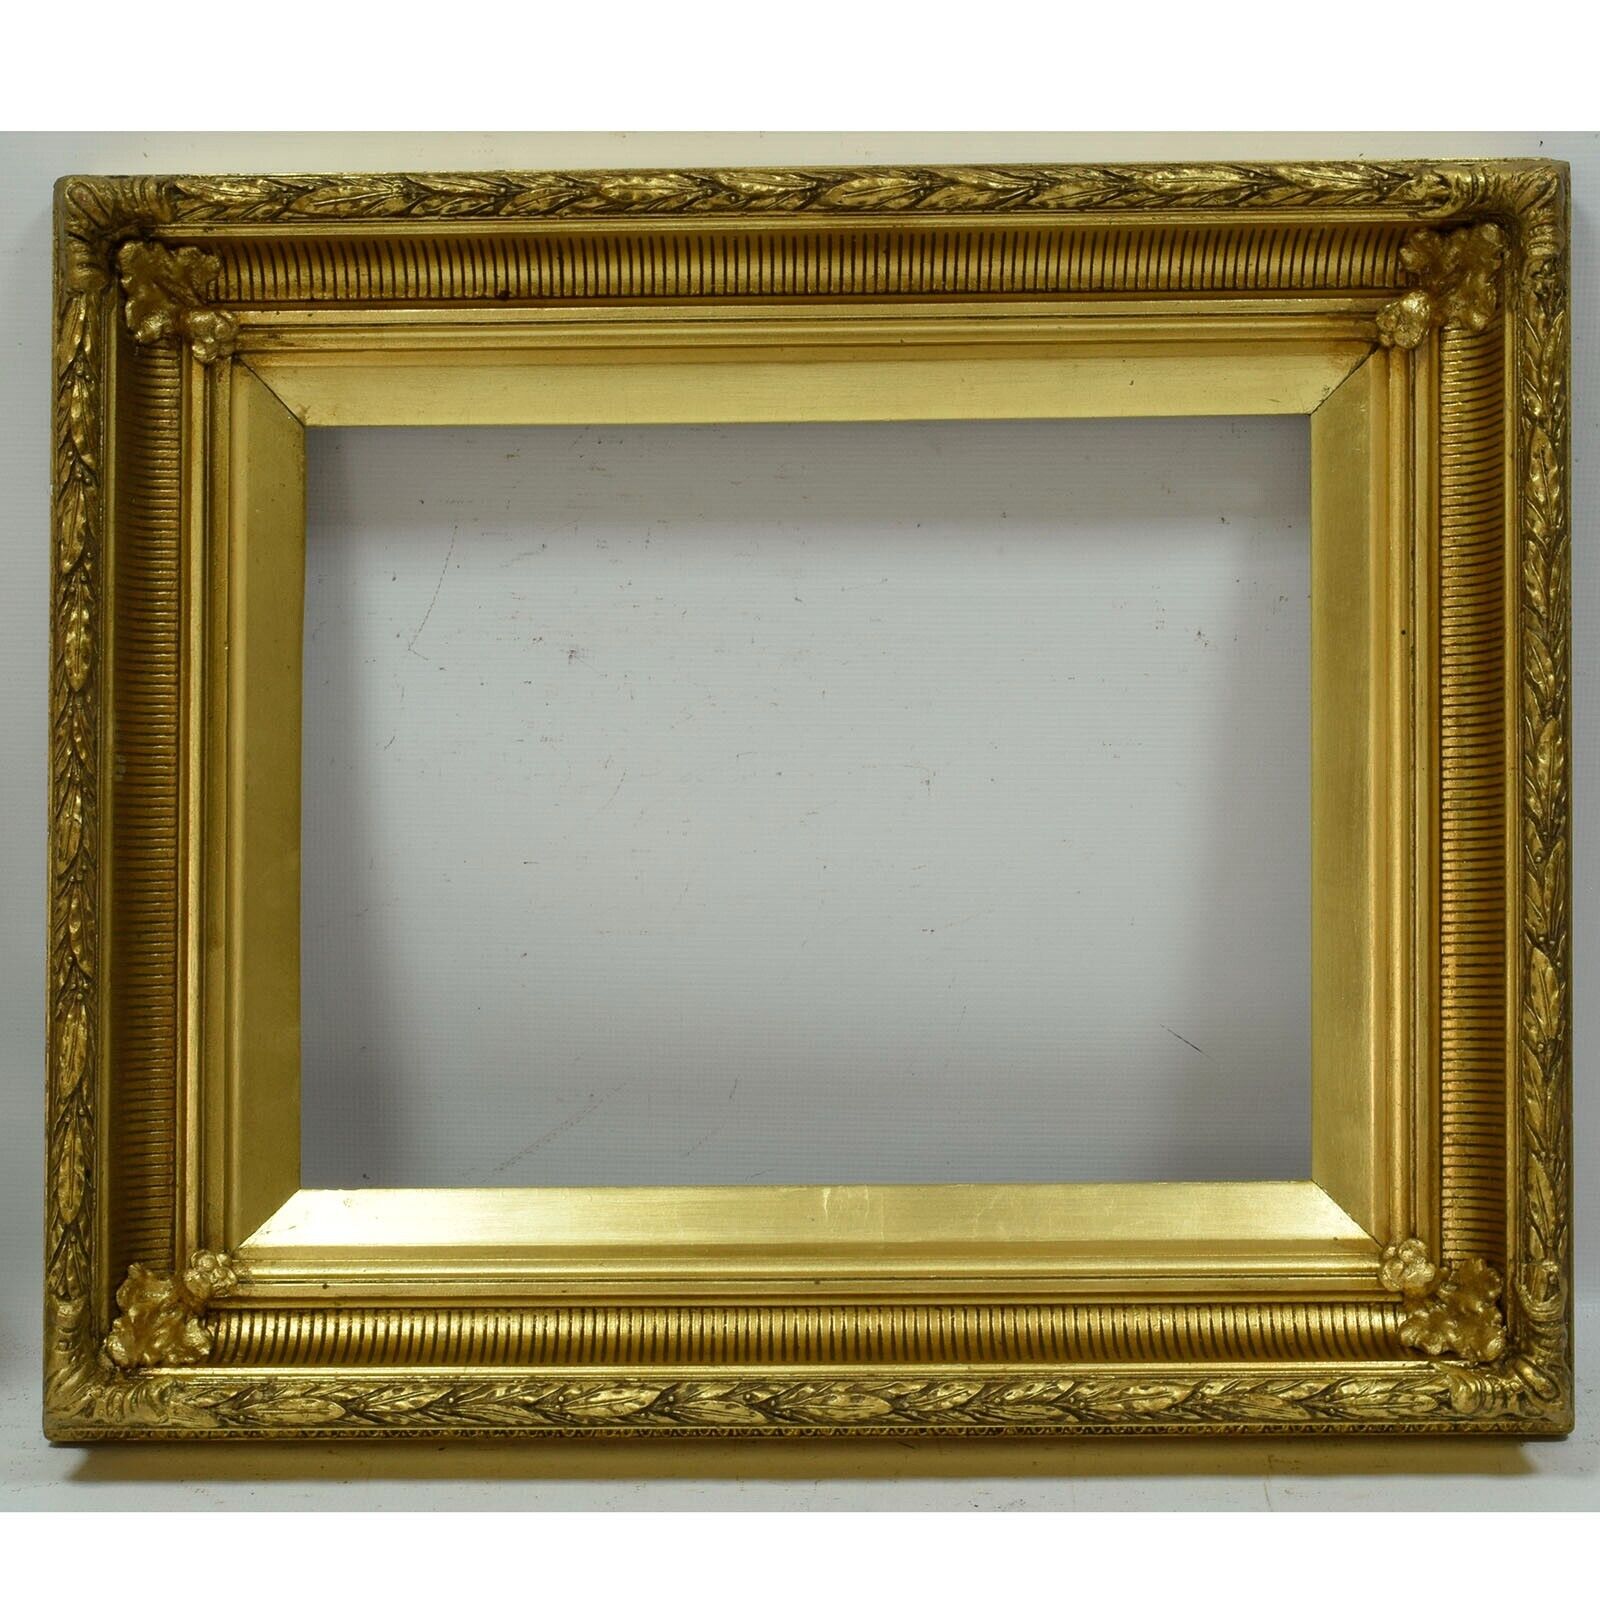 Ca. 1850-1900 Old wooden frame in original condition with leaf metal